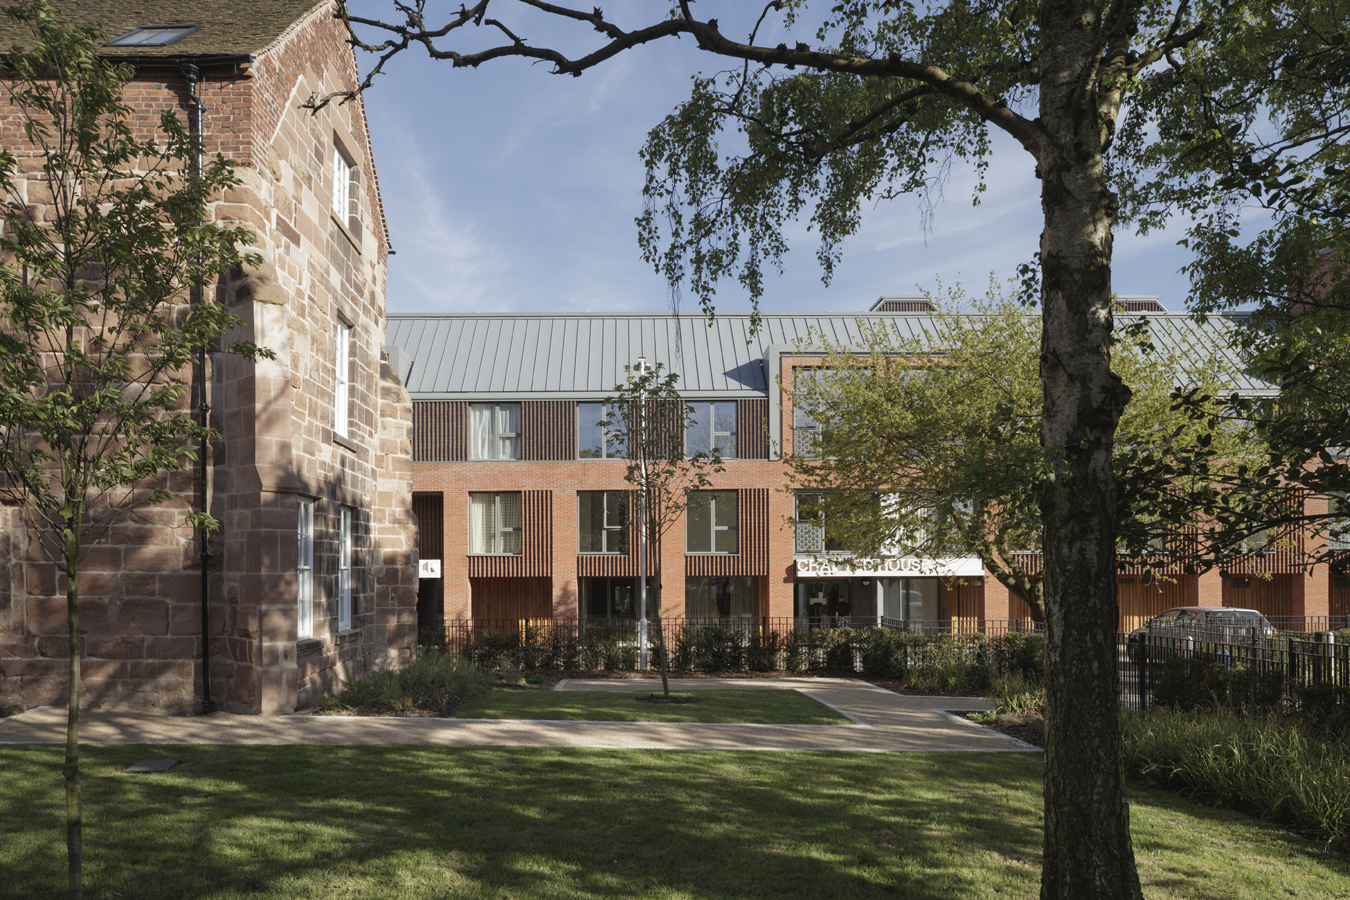 Chapter House shortlisted for 'Housing Project of the Year' at the AJ Architecture Awards 